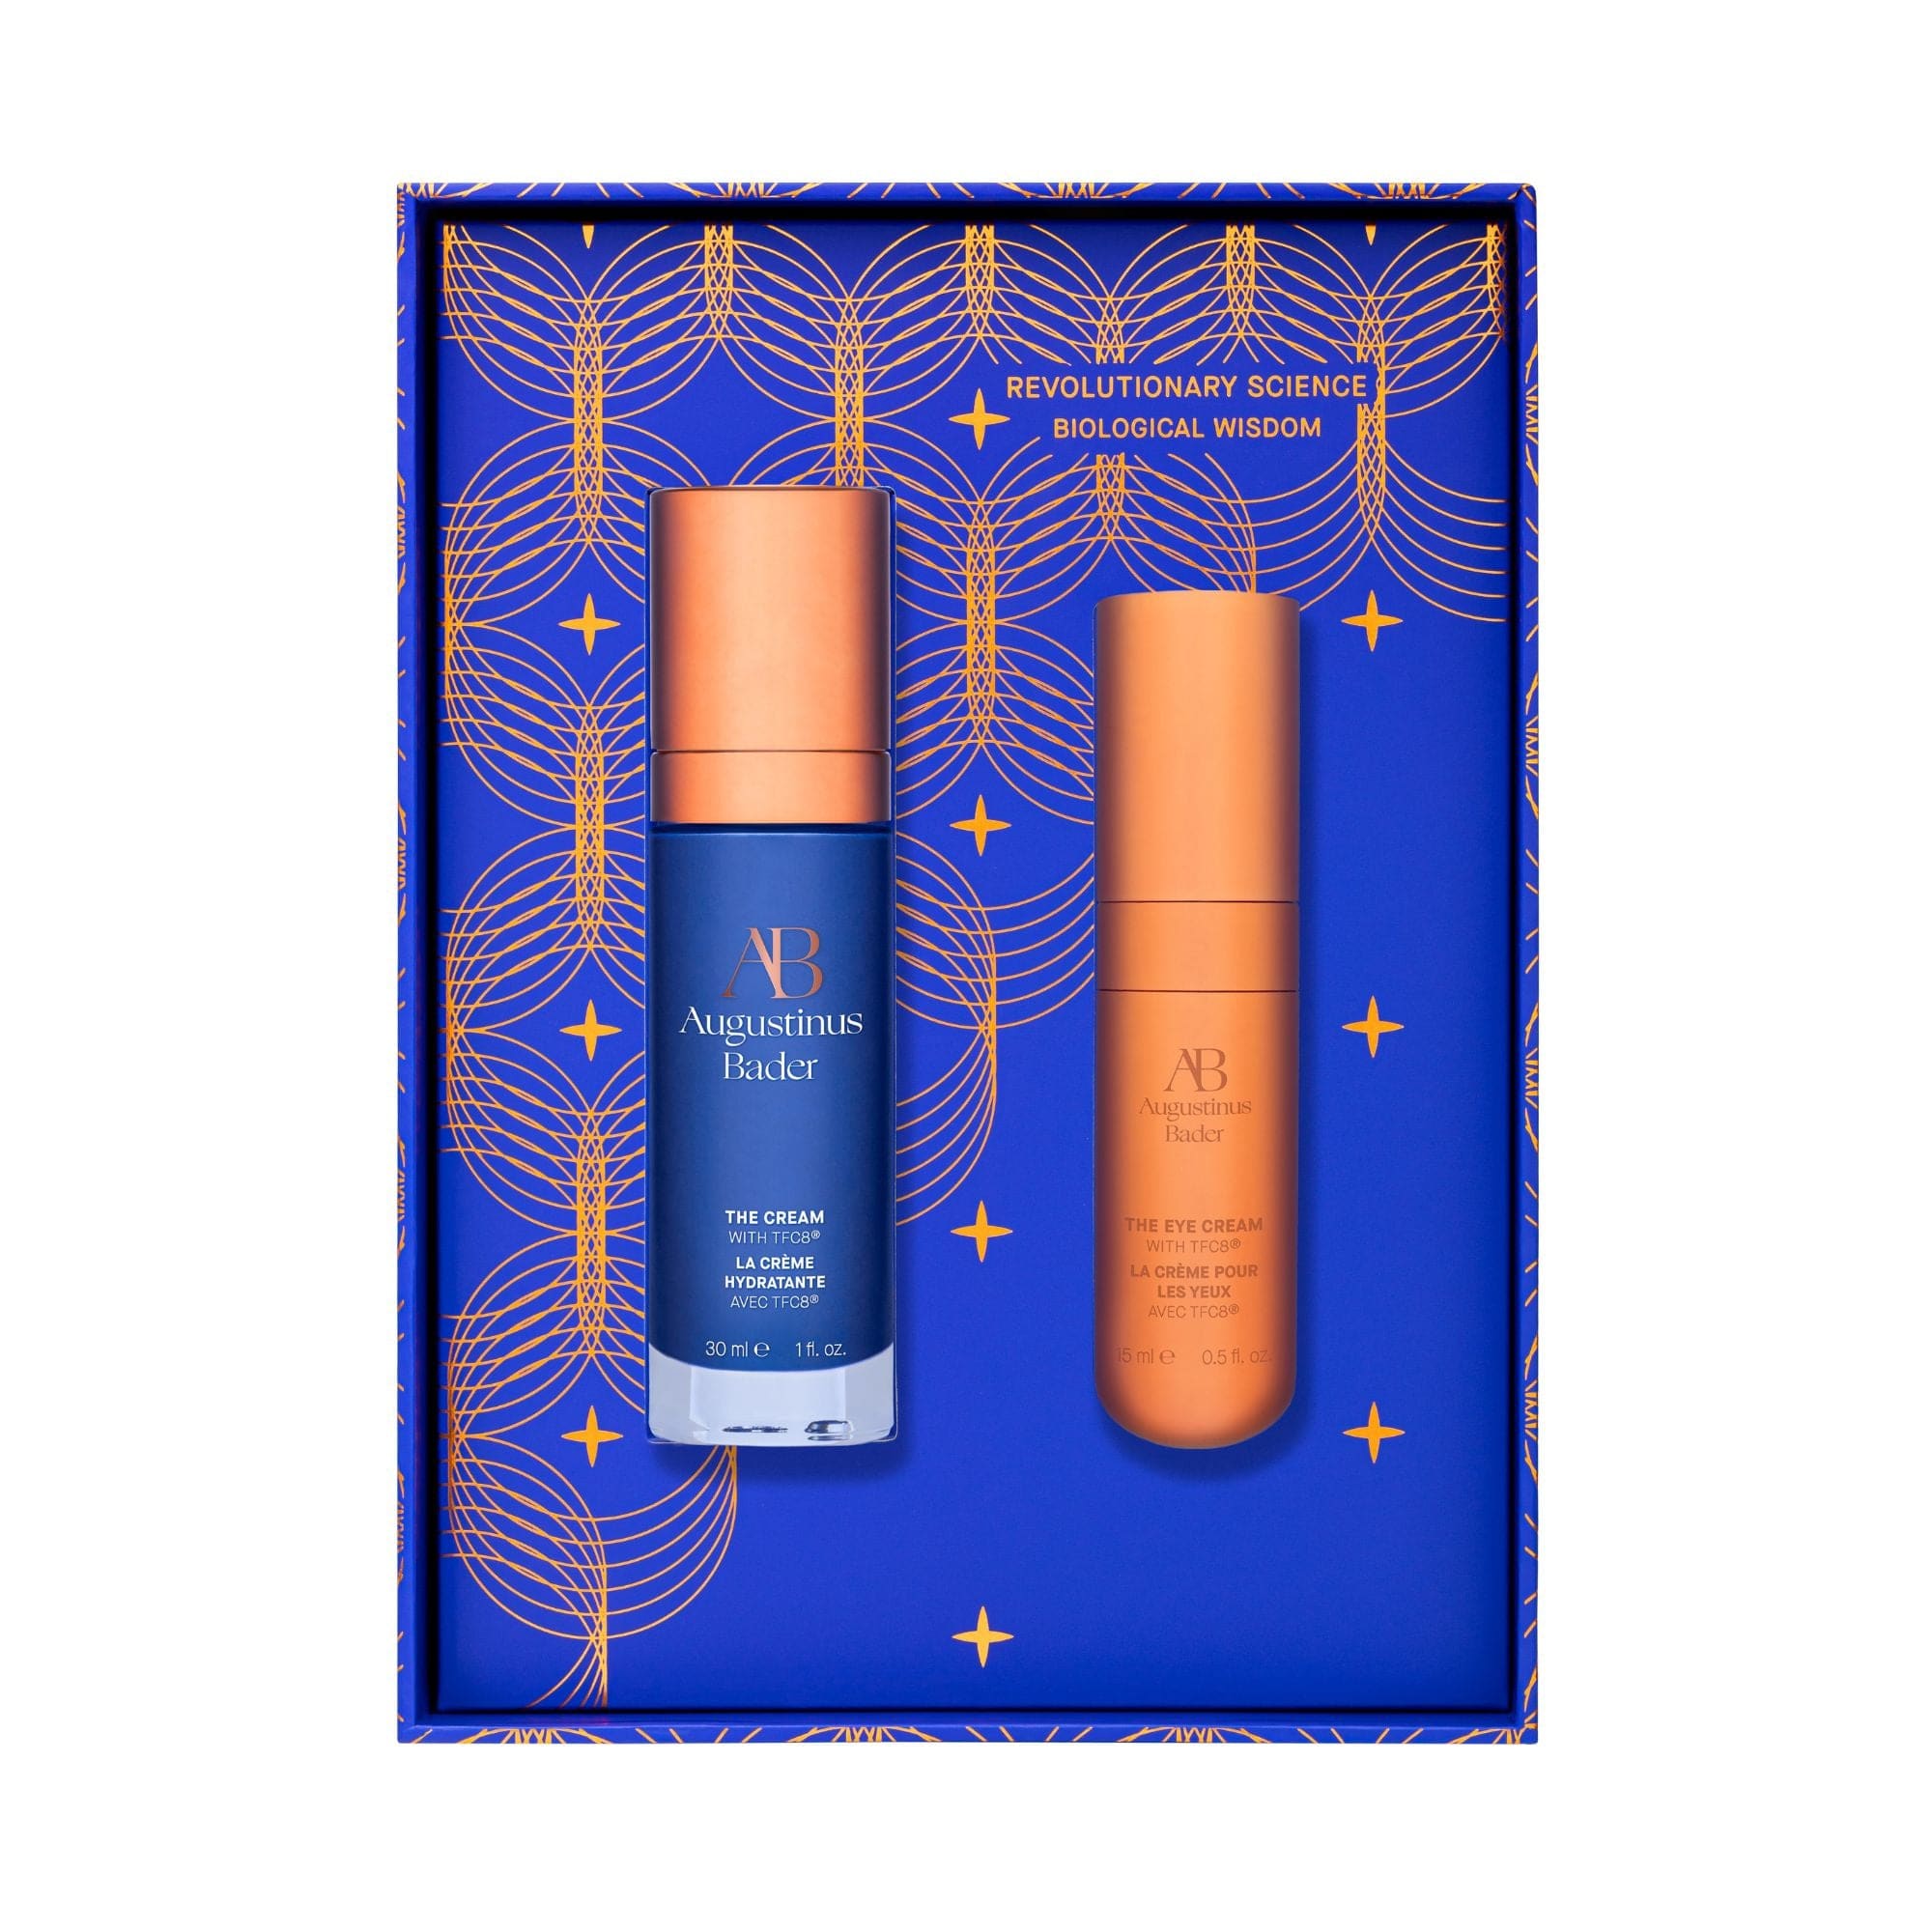 The Renewal Icons with The Cream Augustinus Bader Moisturizing Set